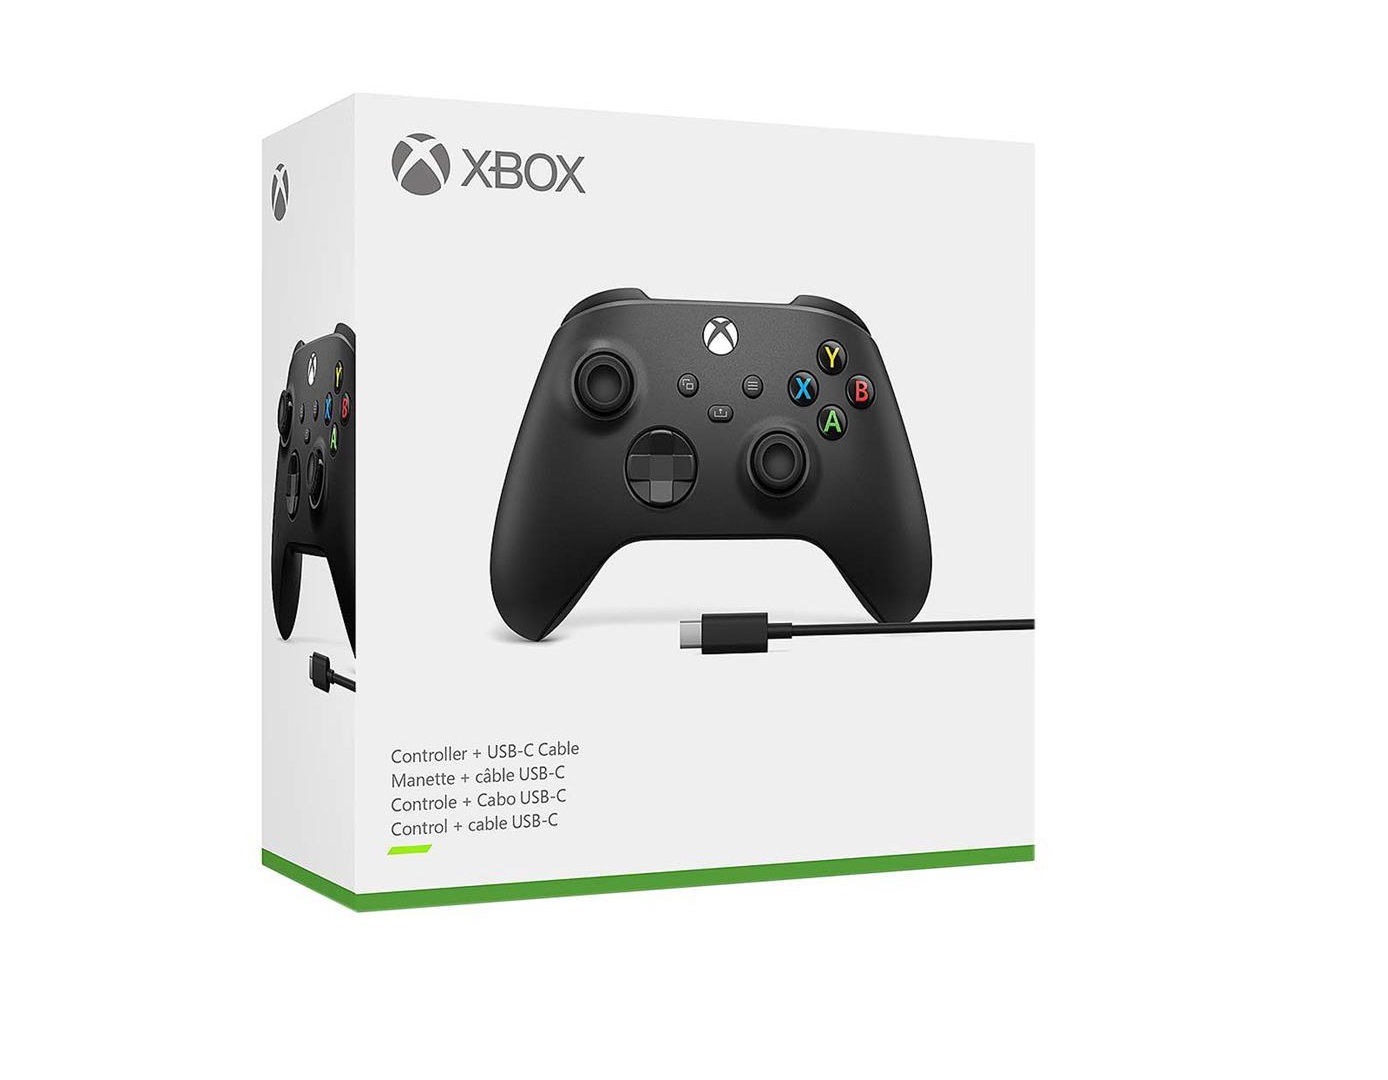 Xbox Wireless Controller + USB-C Cable for Xbox One/Series X/S